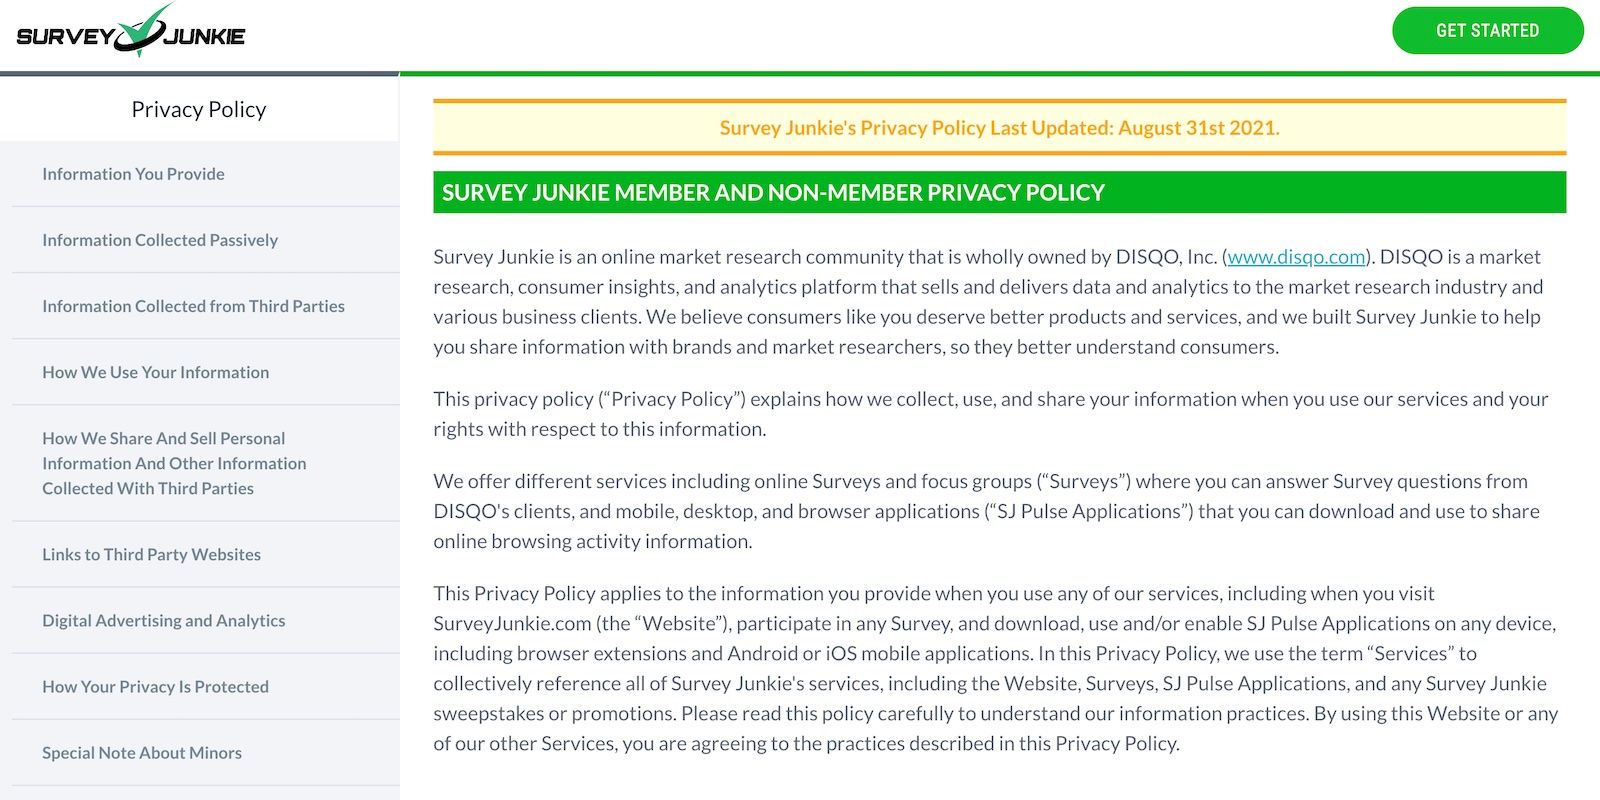 The Privacy Policy of Survey Junkie